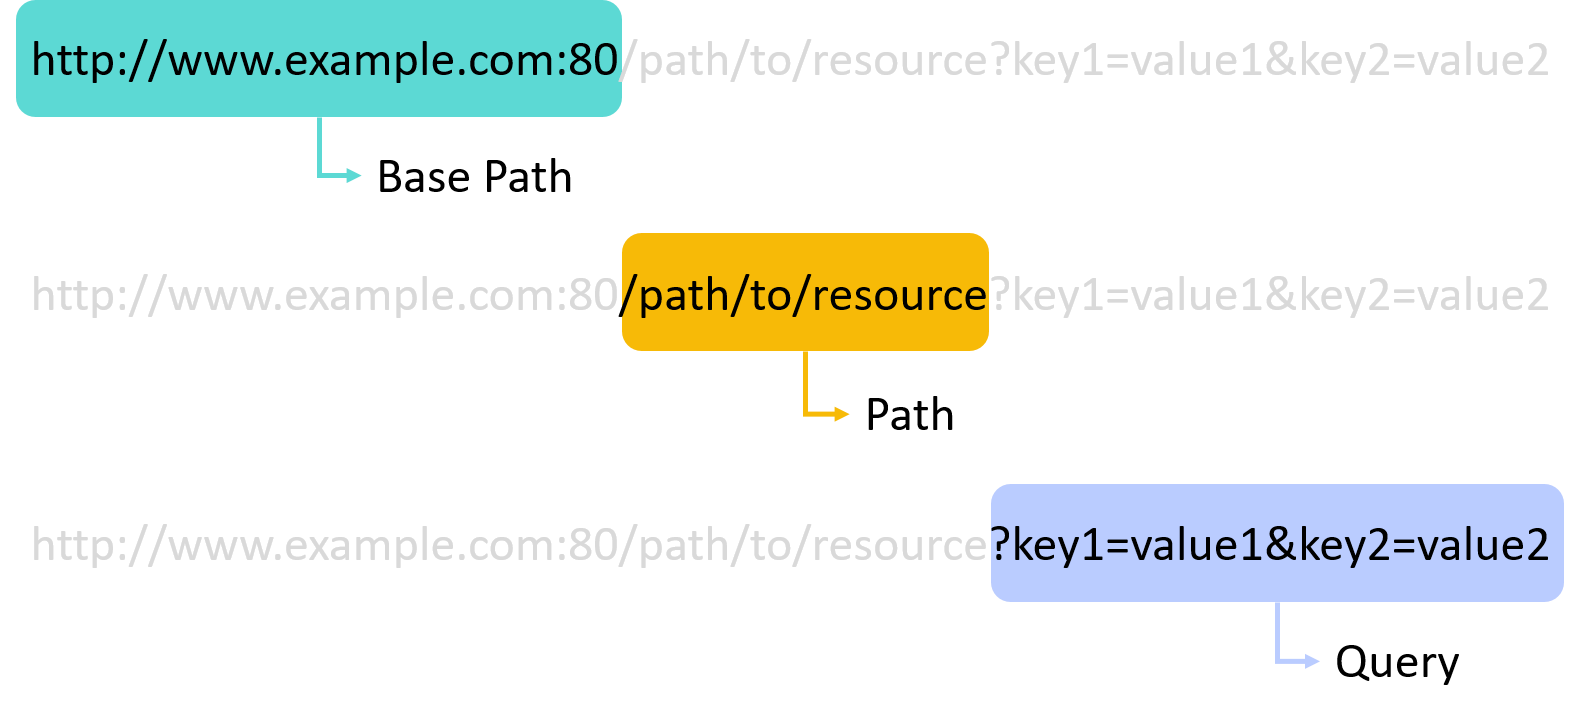 The URL Structure